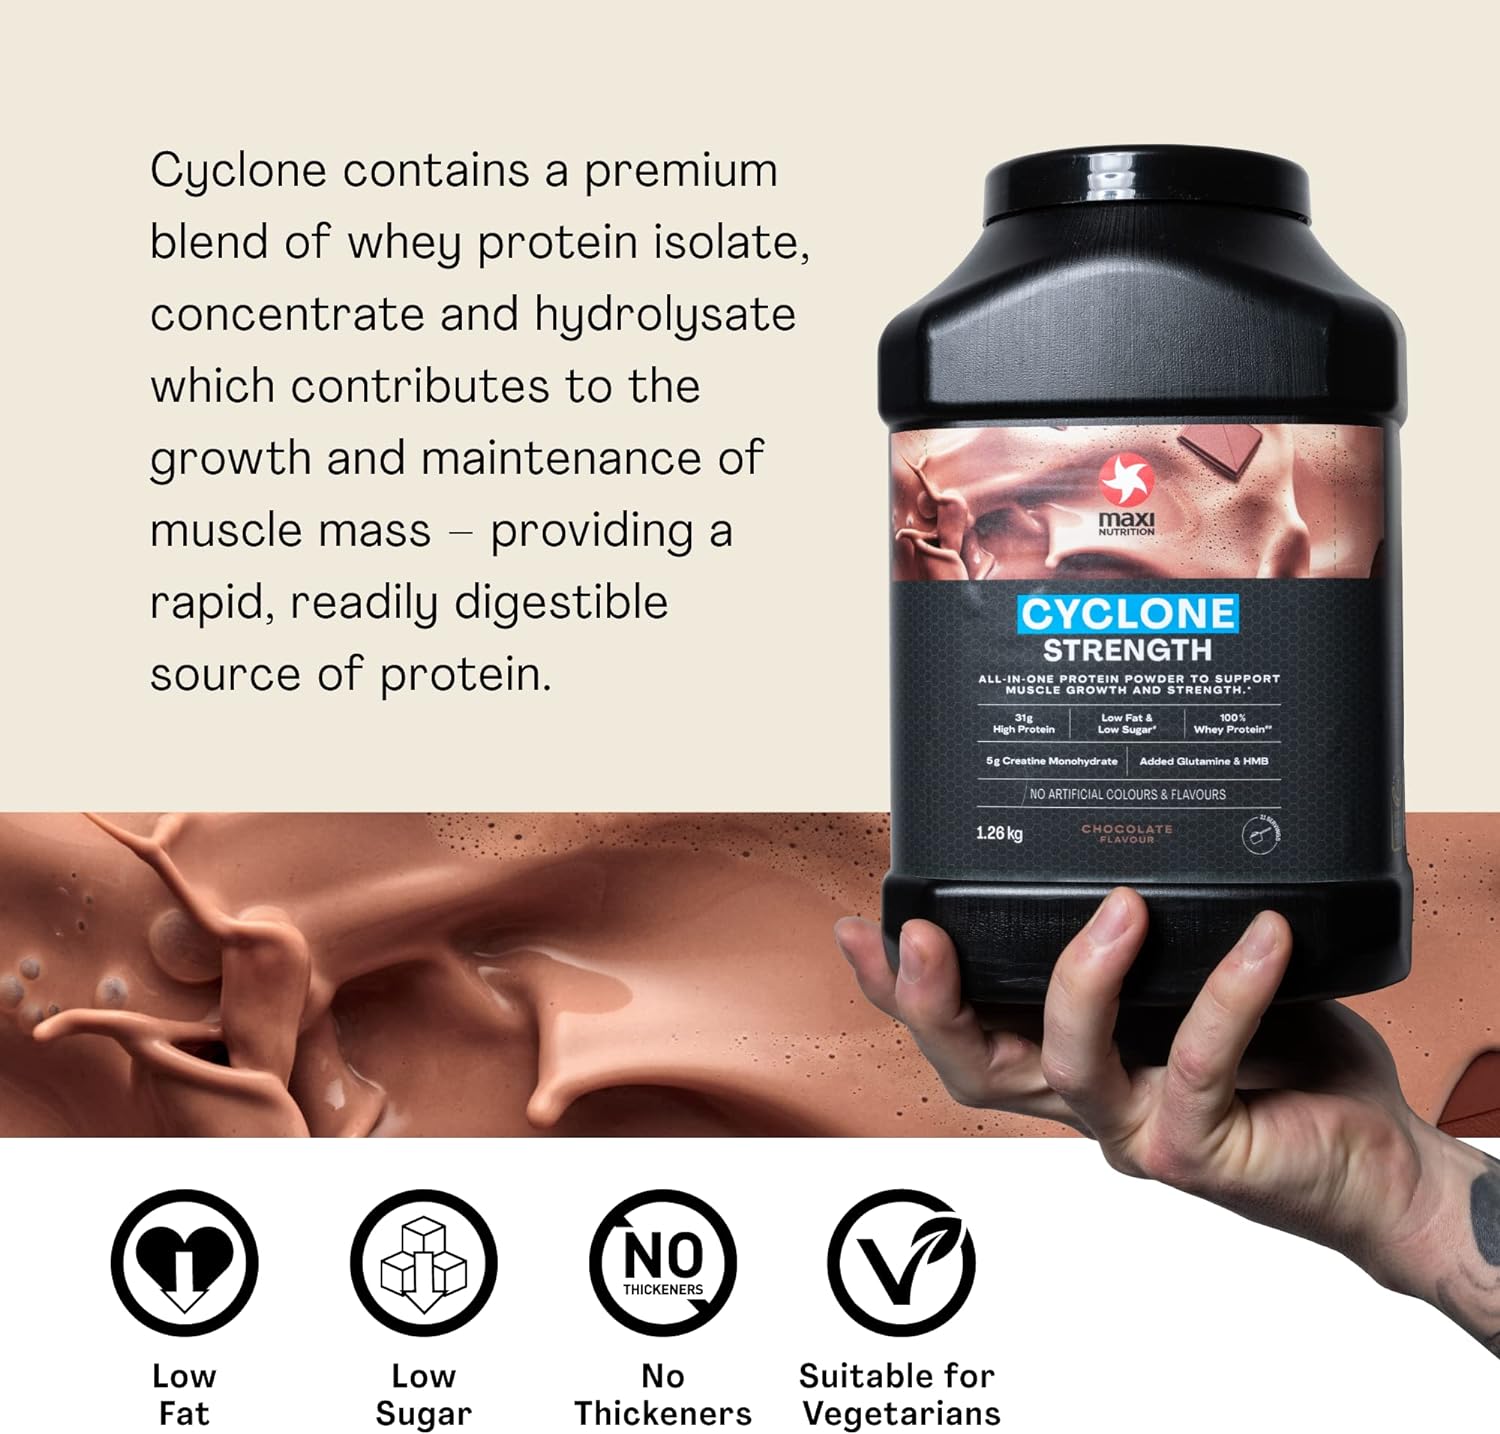 MaxiNutrition - Cyclone, Chocolate - Premium Whey Protein Powder with Added Creatine – Low in Sugar and Fat, Vegetarian-Friendly - 31g Protein, 204 kcal per Serving, 1.26kg